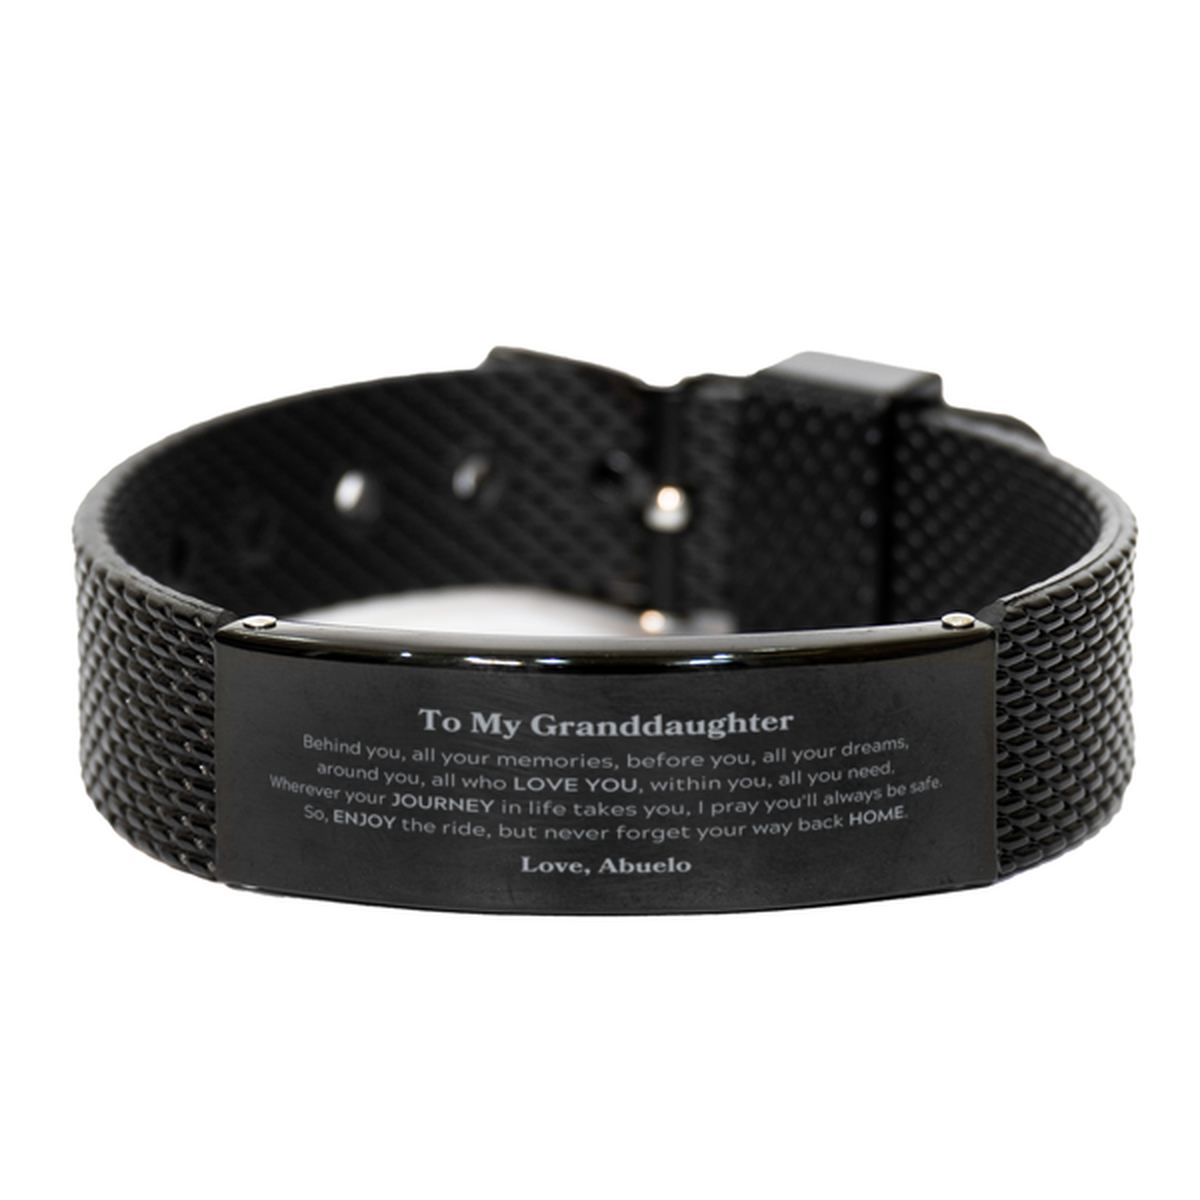 To My Granddaughter Graduation Gifts from Abuelo, Granddaughter Black Shark Mesh Bracelet Christmas Birthday Gifts for Granddaughter Behind you, all your memories, before you, all your dreams. Love, Abuelo